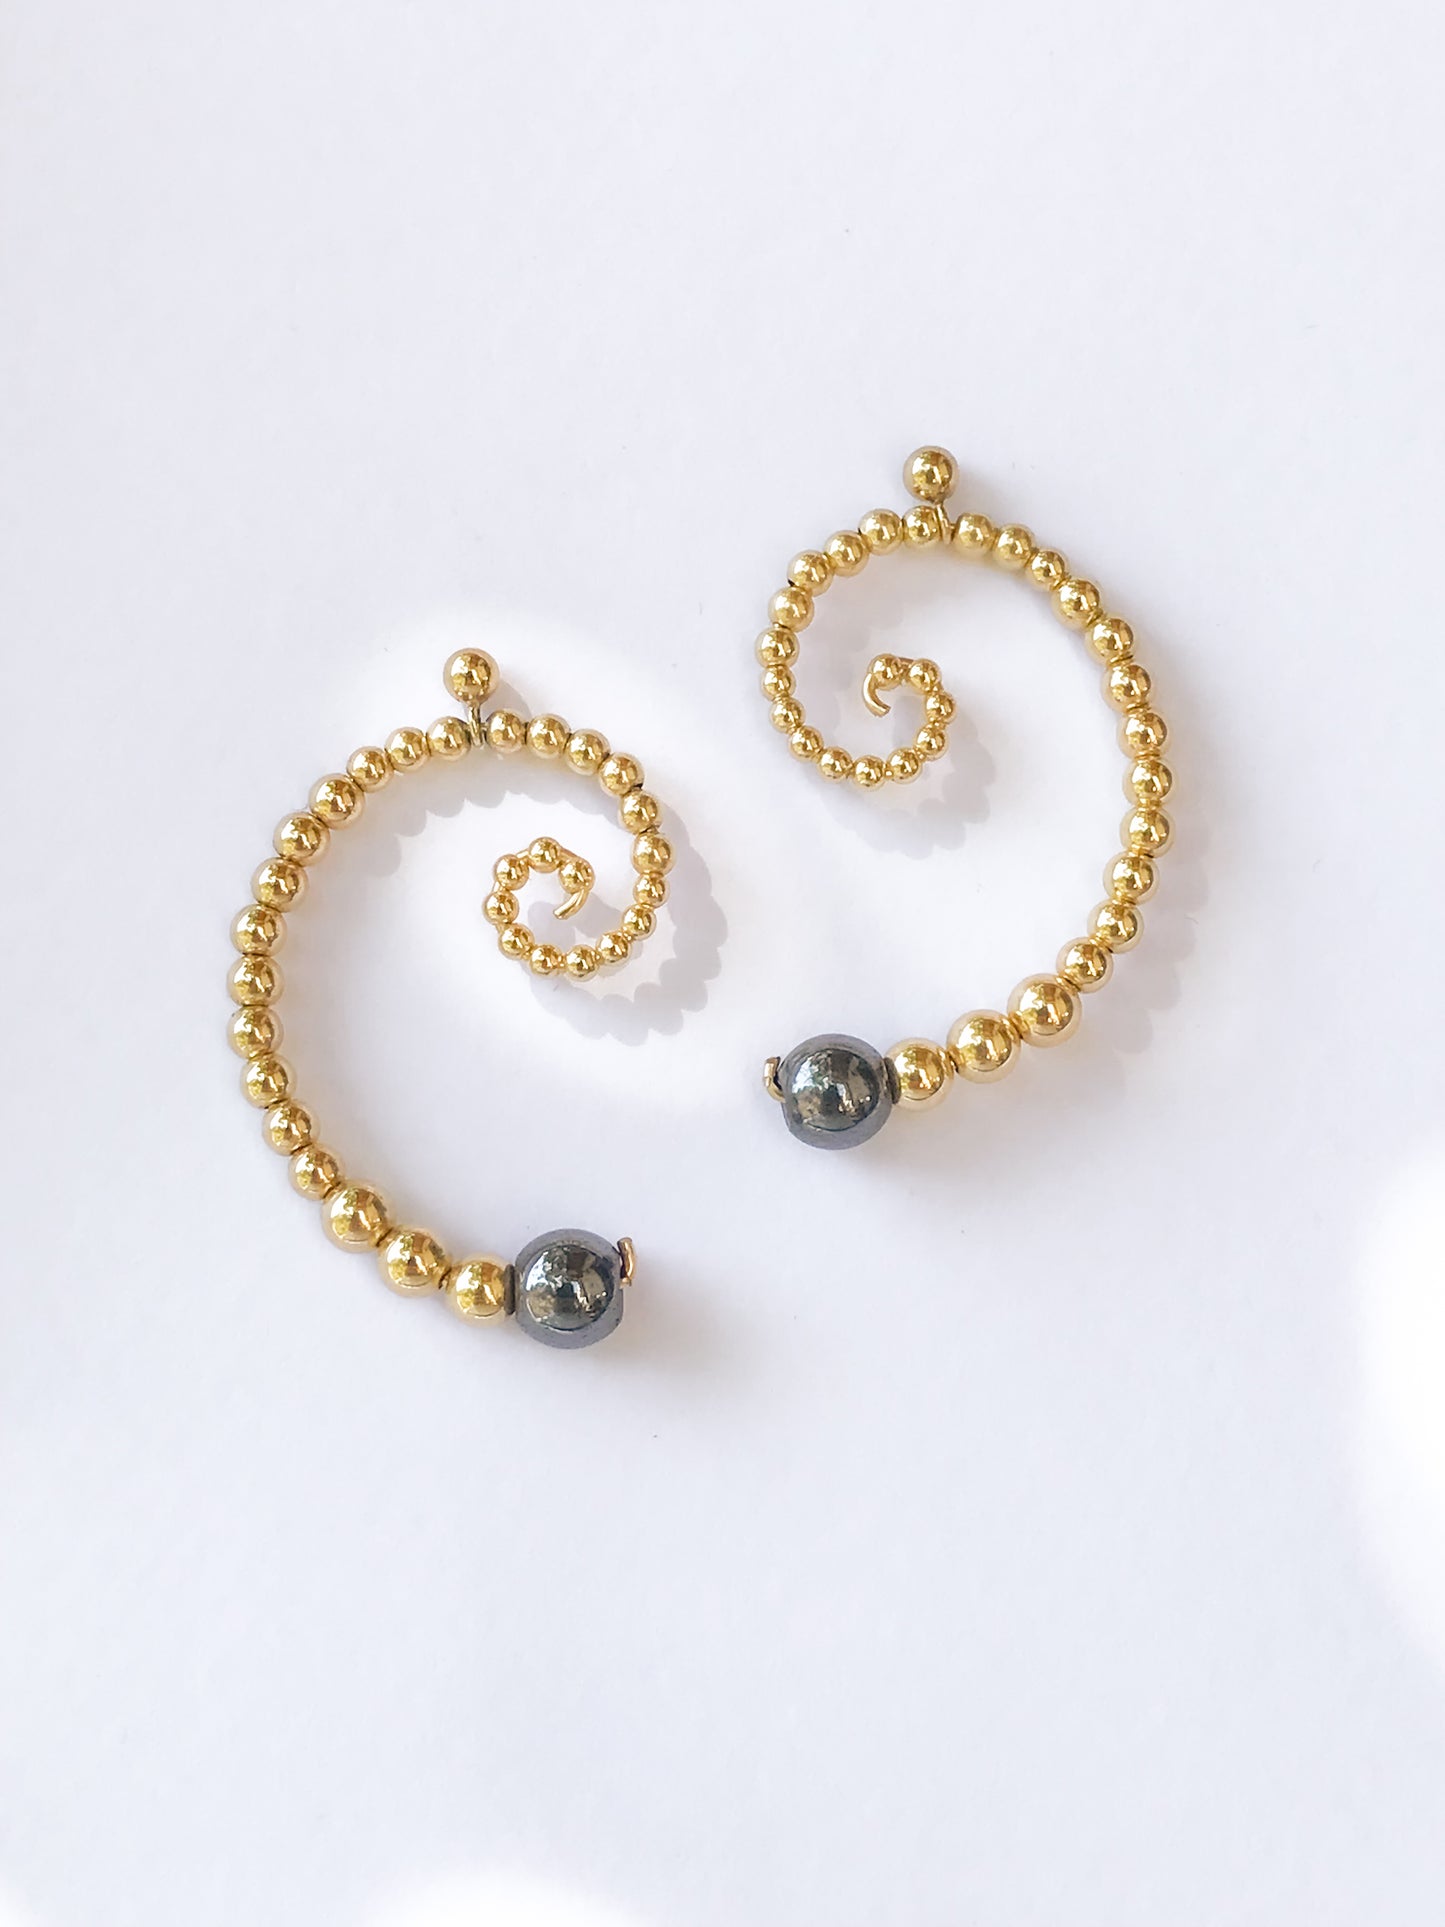 Beaded Spiral Earrings with Hematite